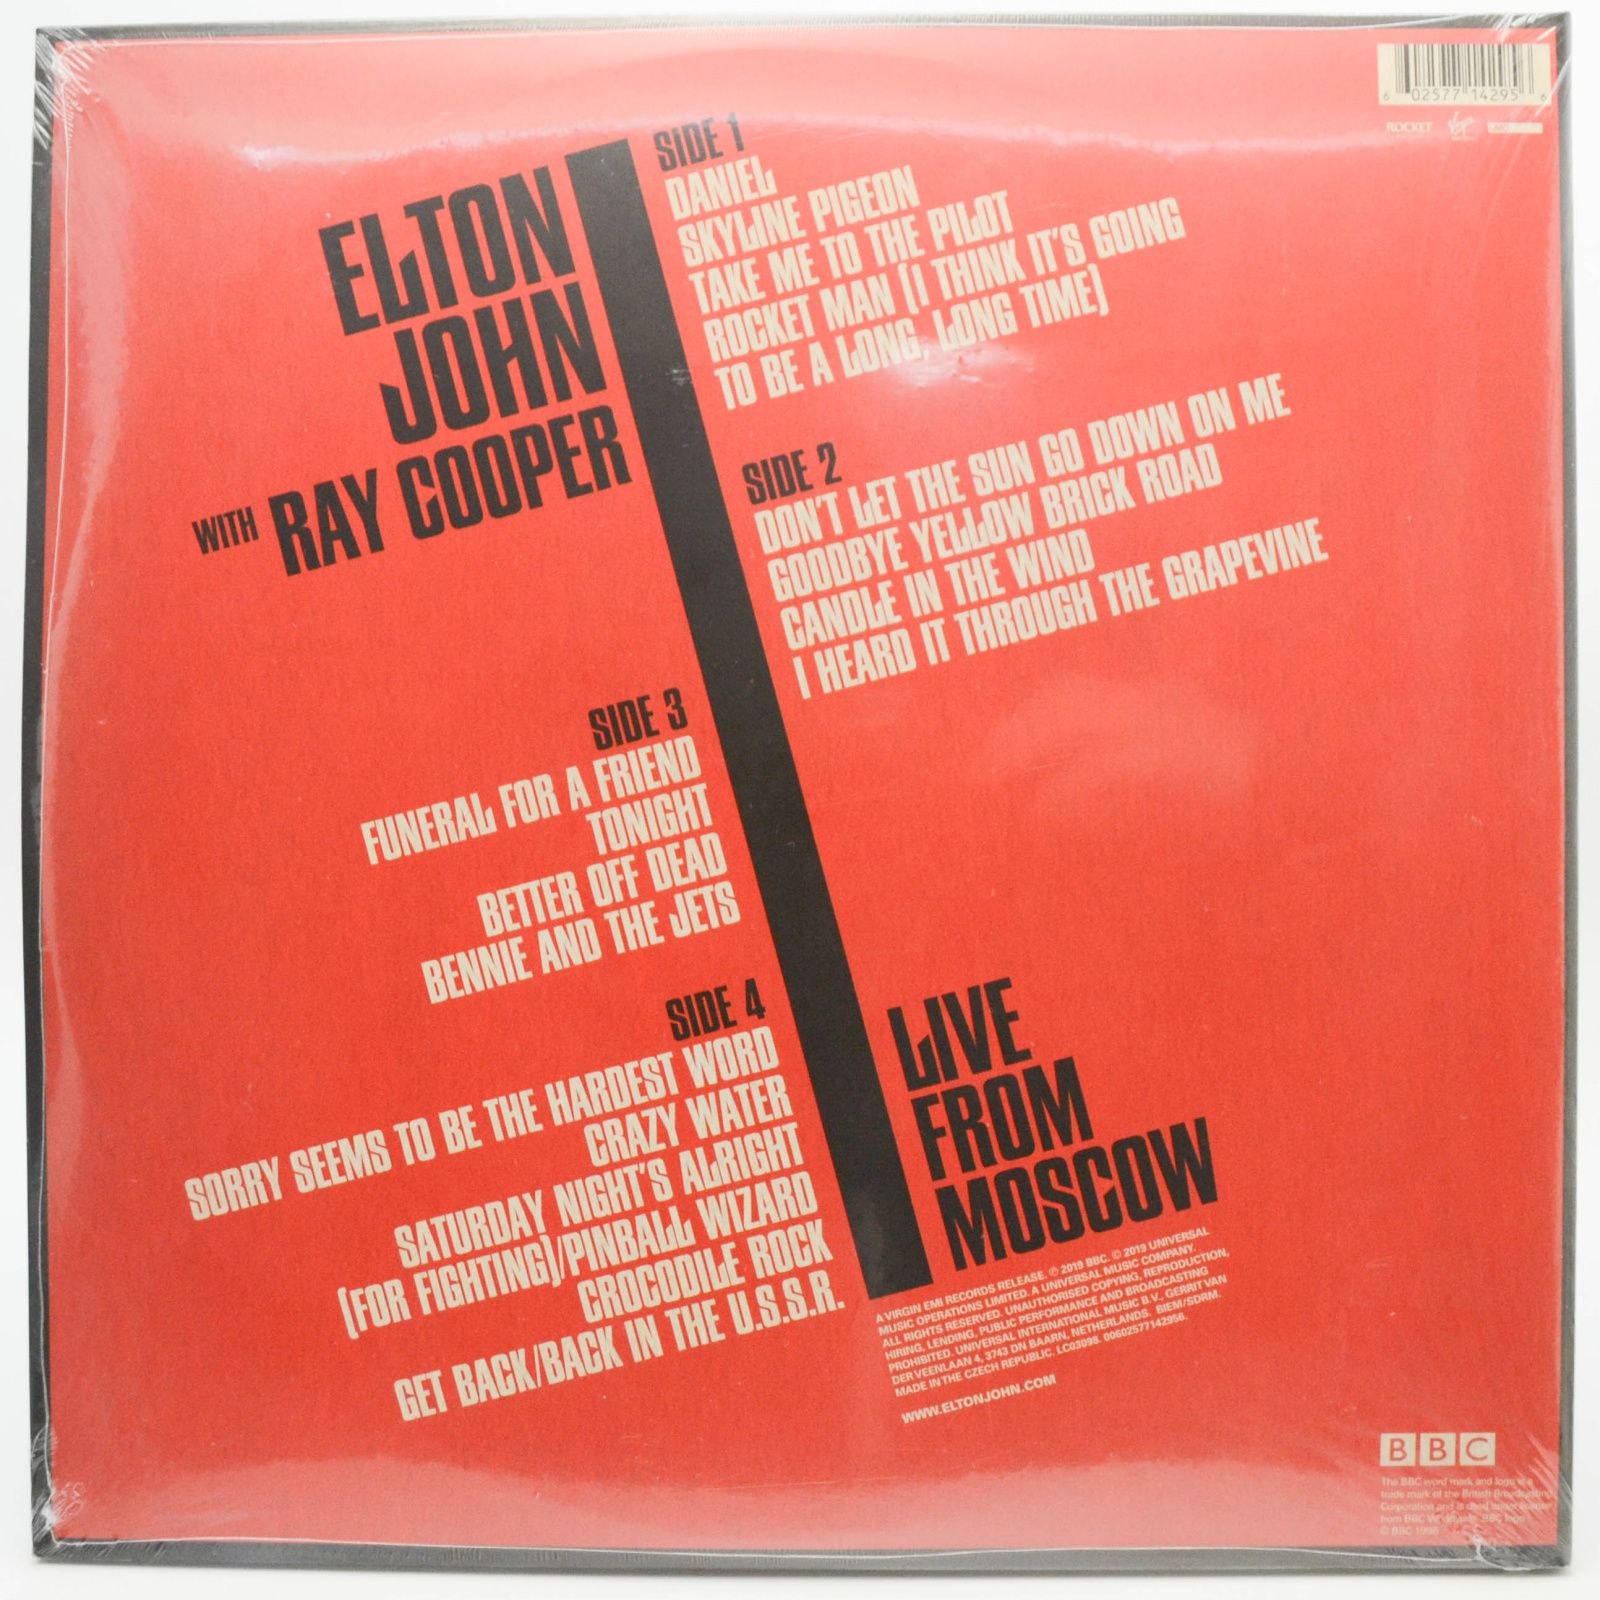 Elton John With Ray Cooper — Live From Moscow (2LP), 2019